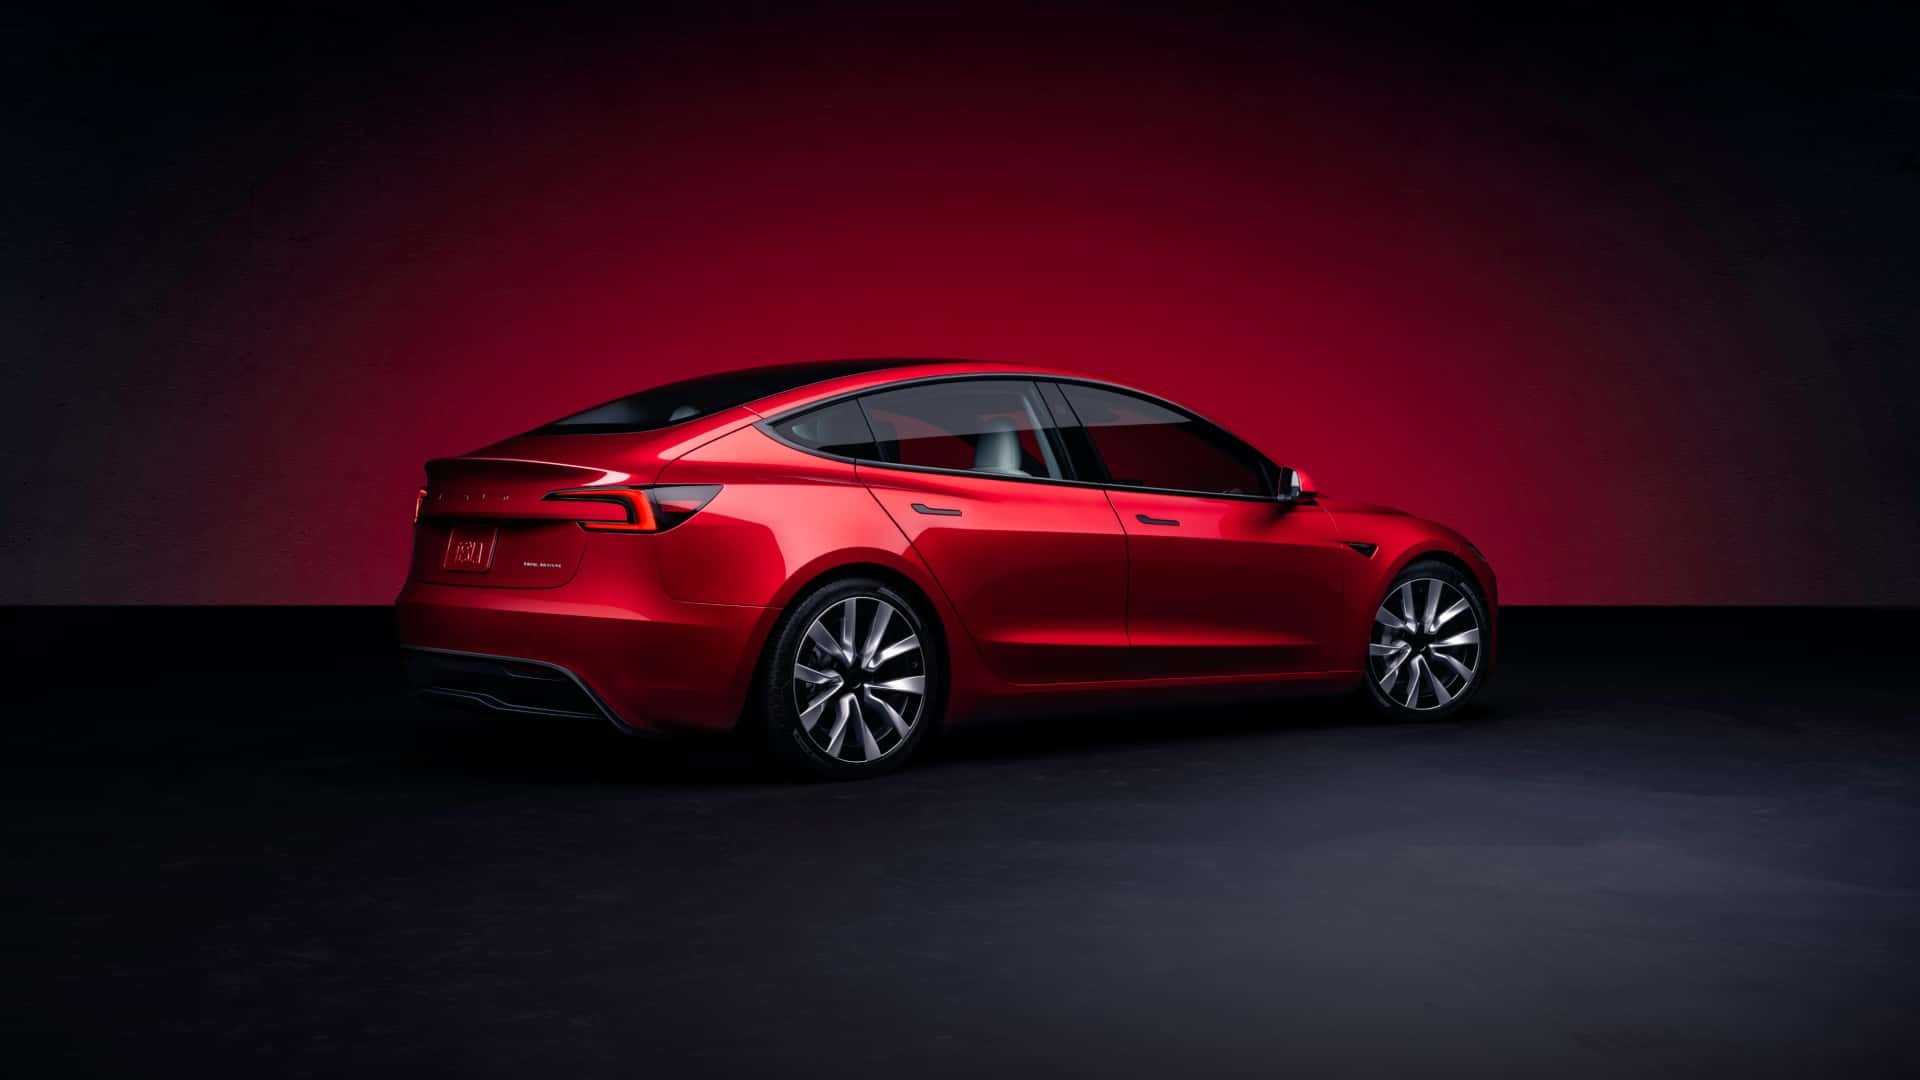 tesla model 3 might get ludicrous trim with sport suspension and brakes